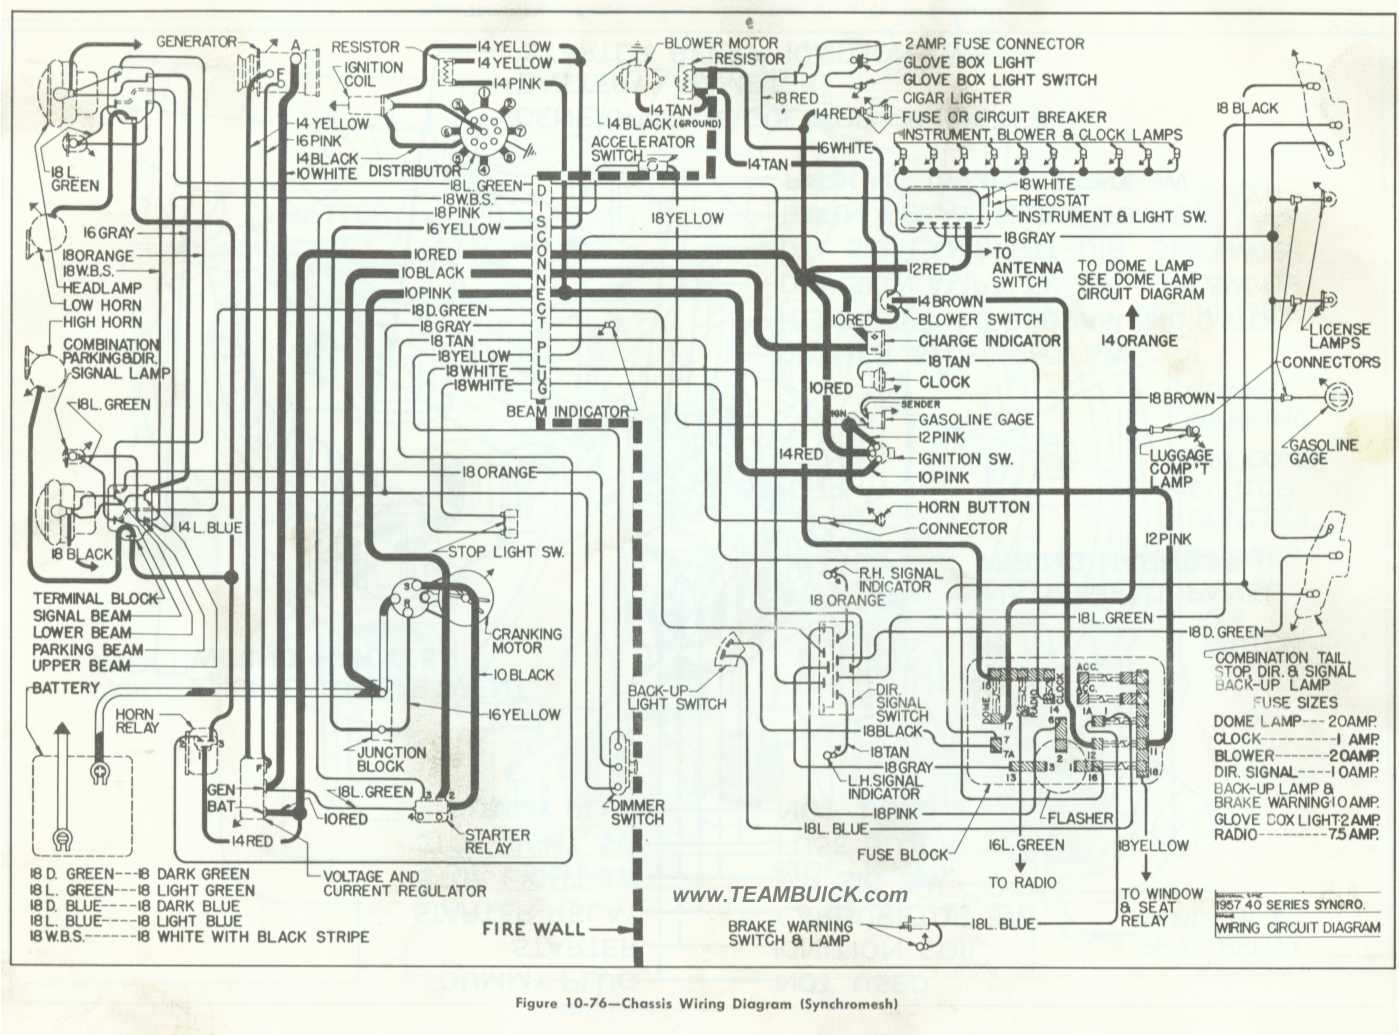 1957 Buick Chassis Wiring Diagram ( Synchromesh)